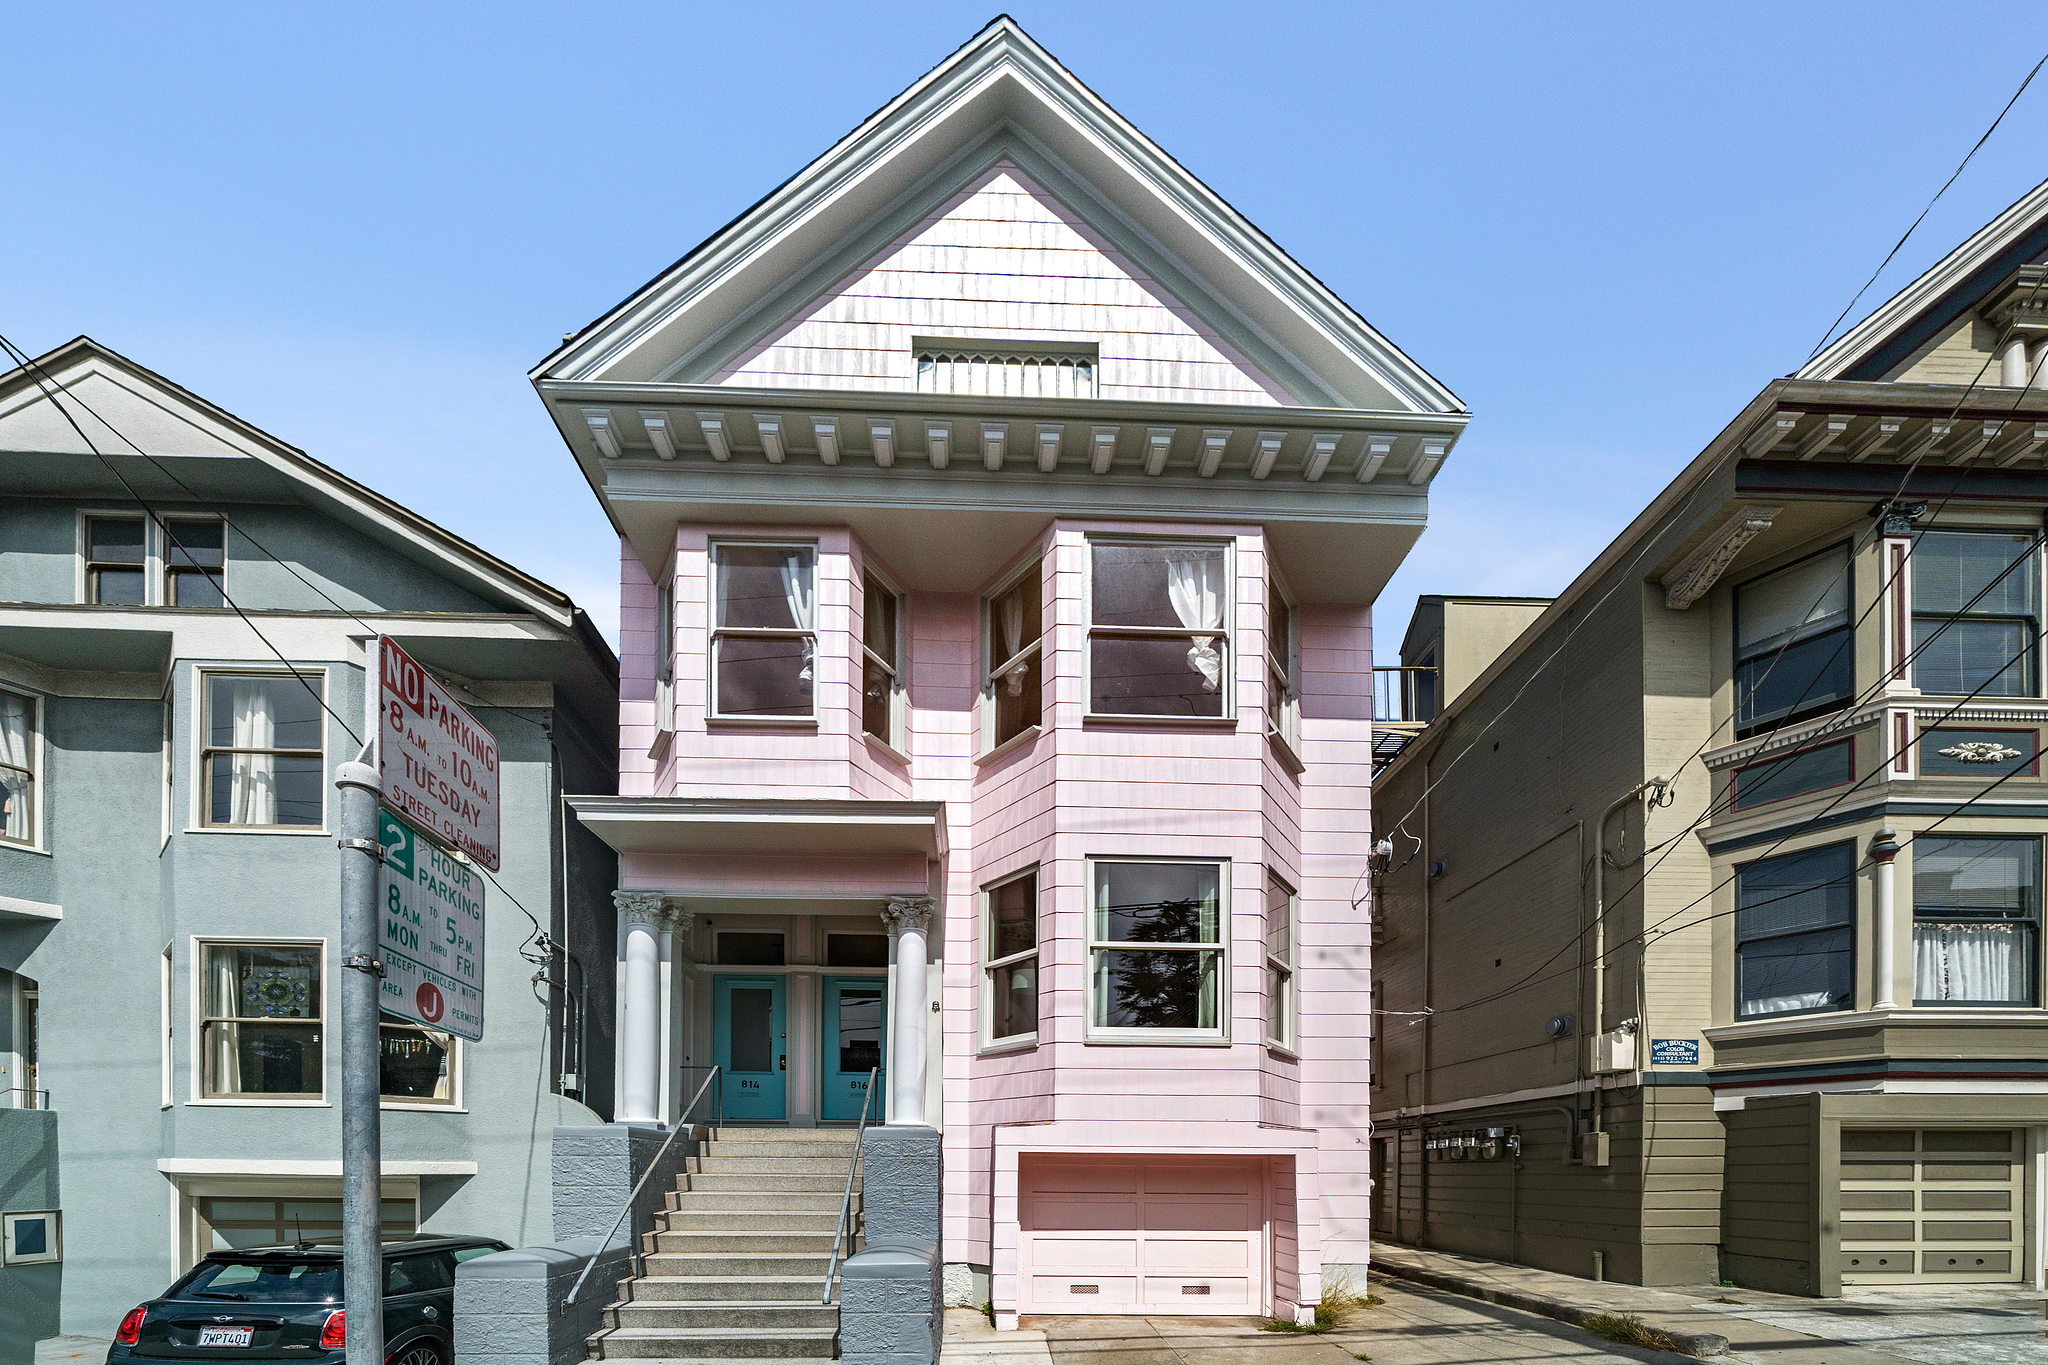 Property Photo: Exterior view of 814-816 Cole Street, featuring a pink facade